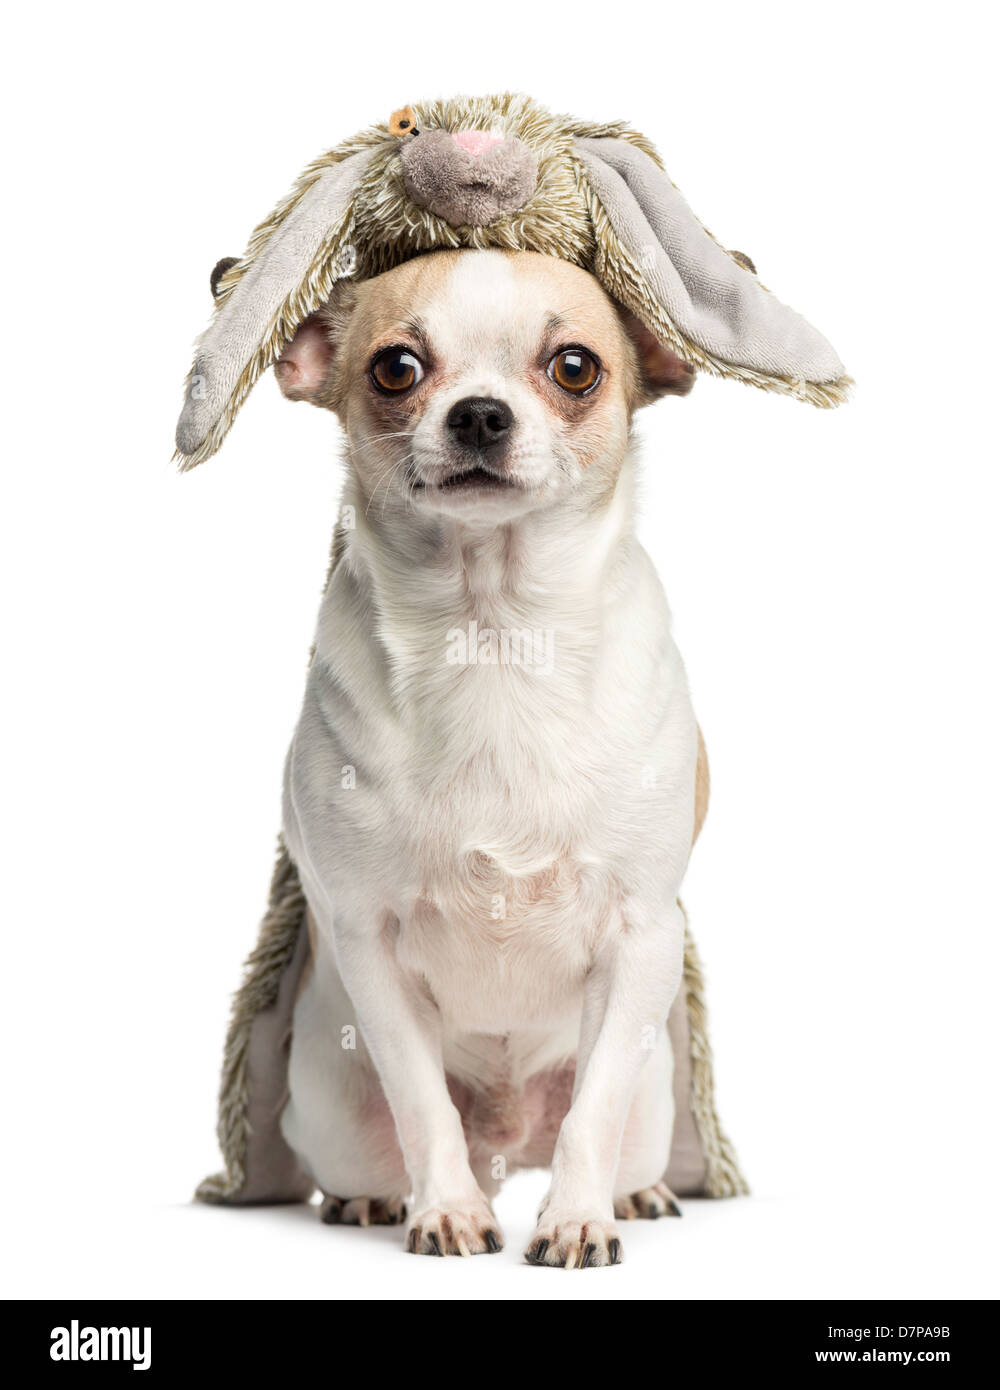 Chihuahua, 2 years old, sitting with a stuffed toy on its head against white background Stock Photo